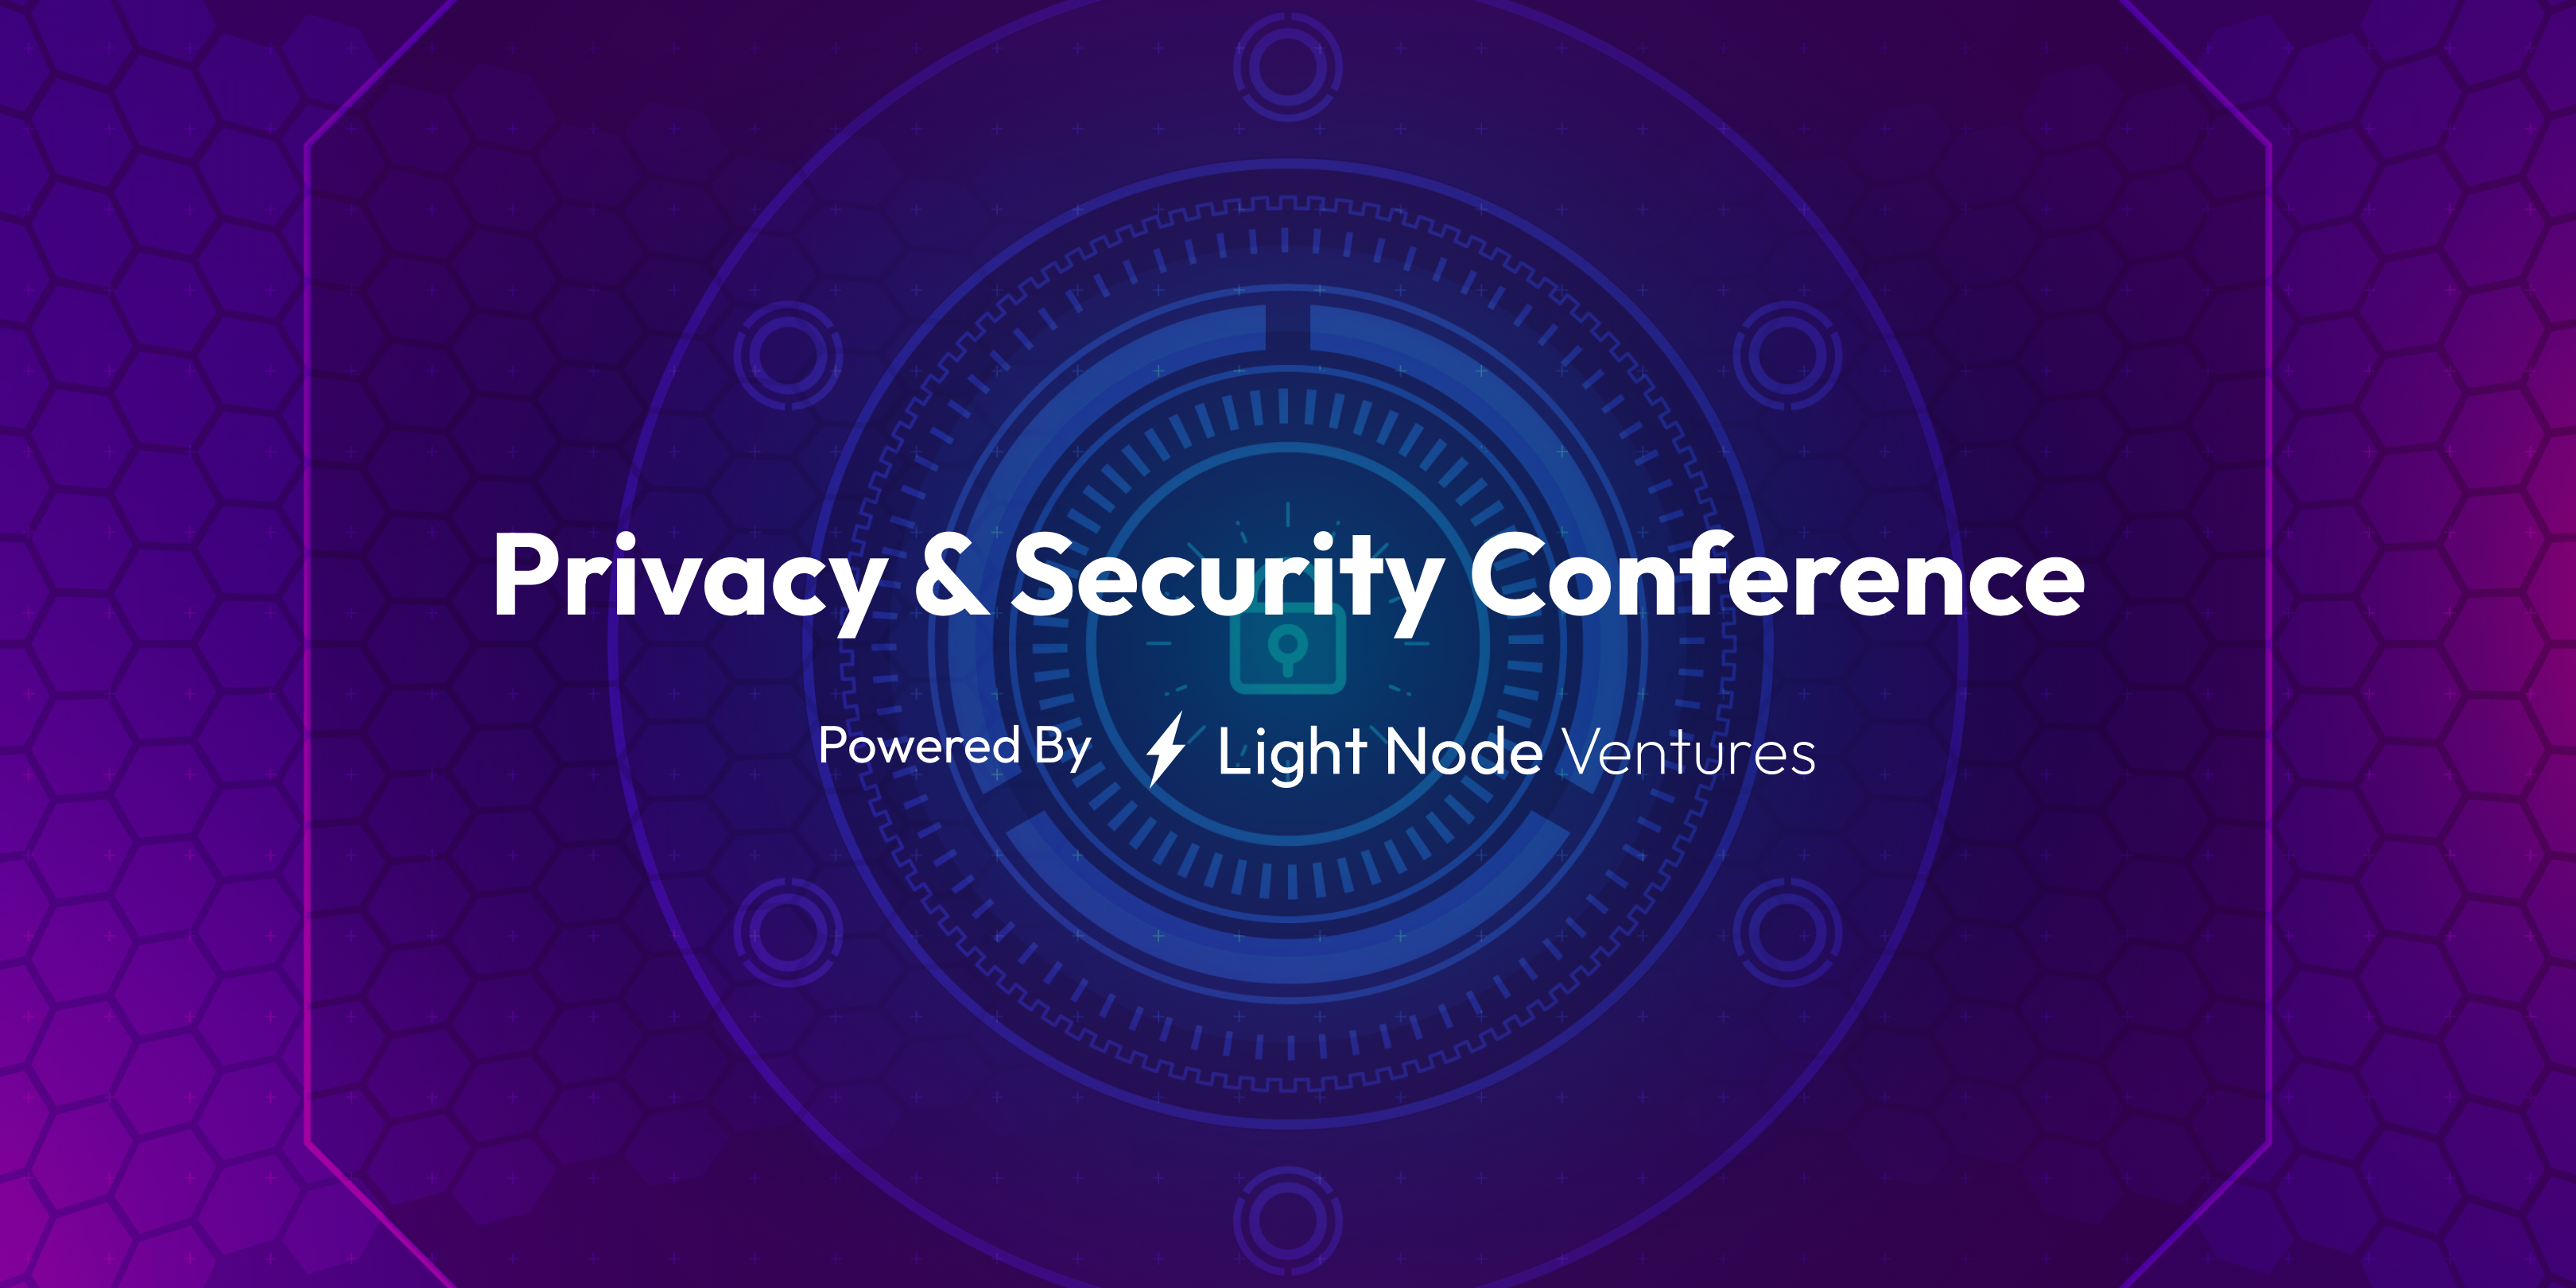 PRIVACY & SECURITY CONFERENCE